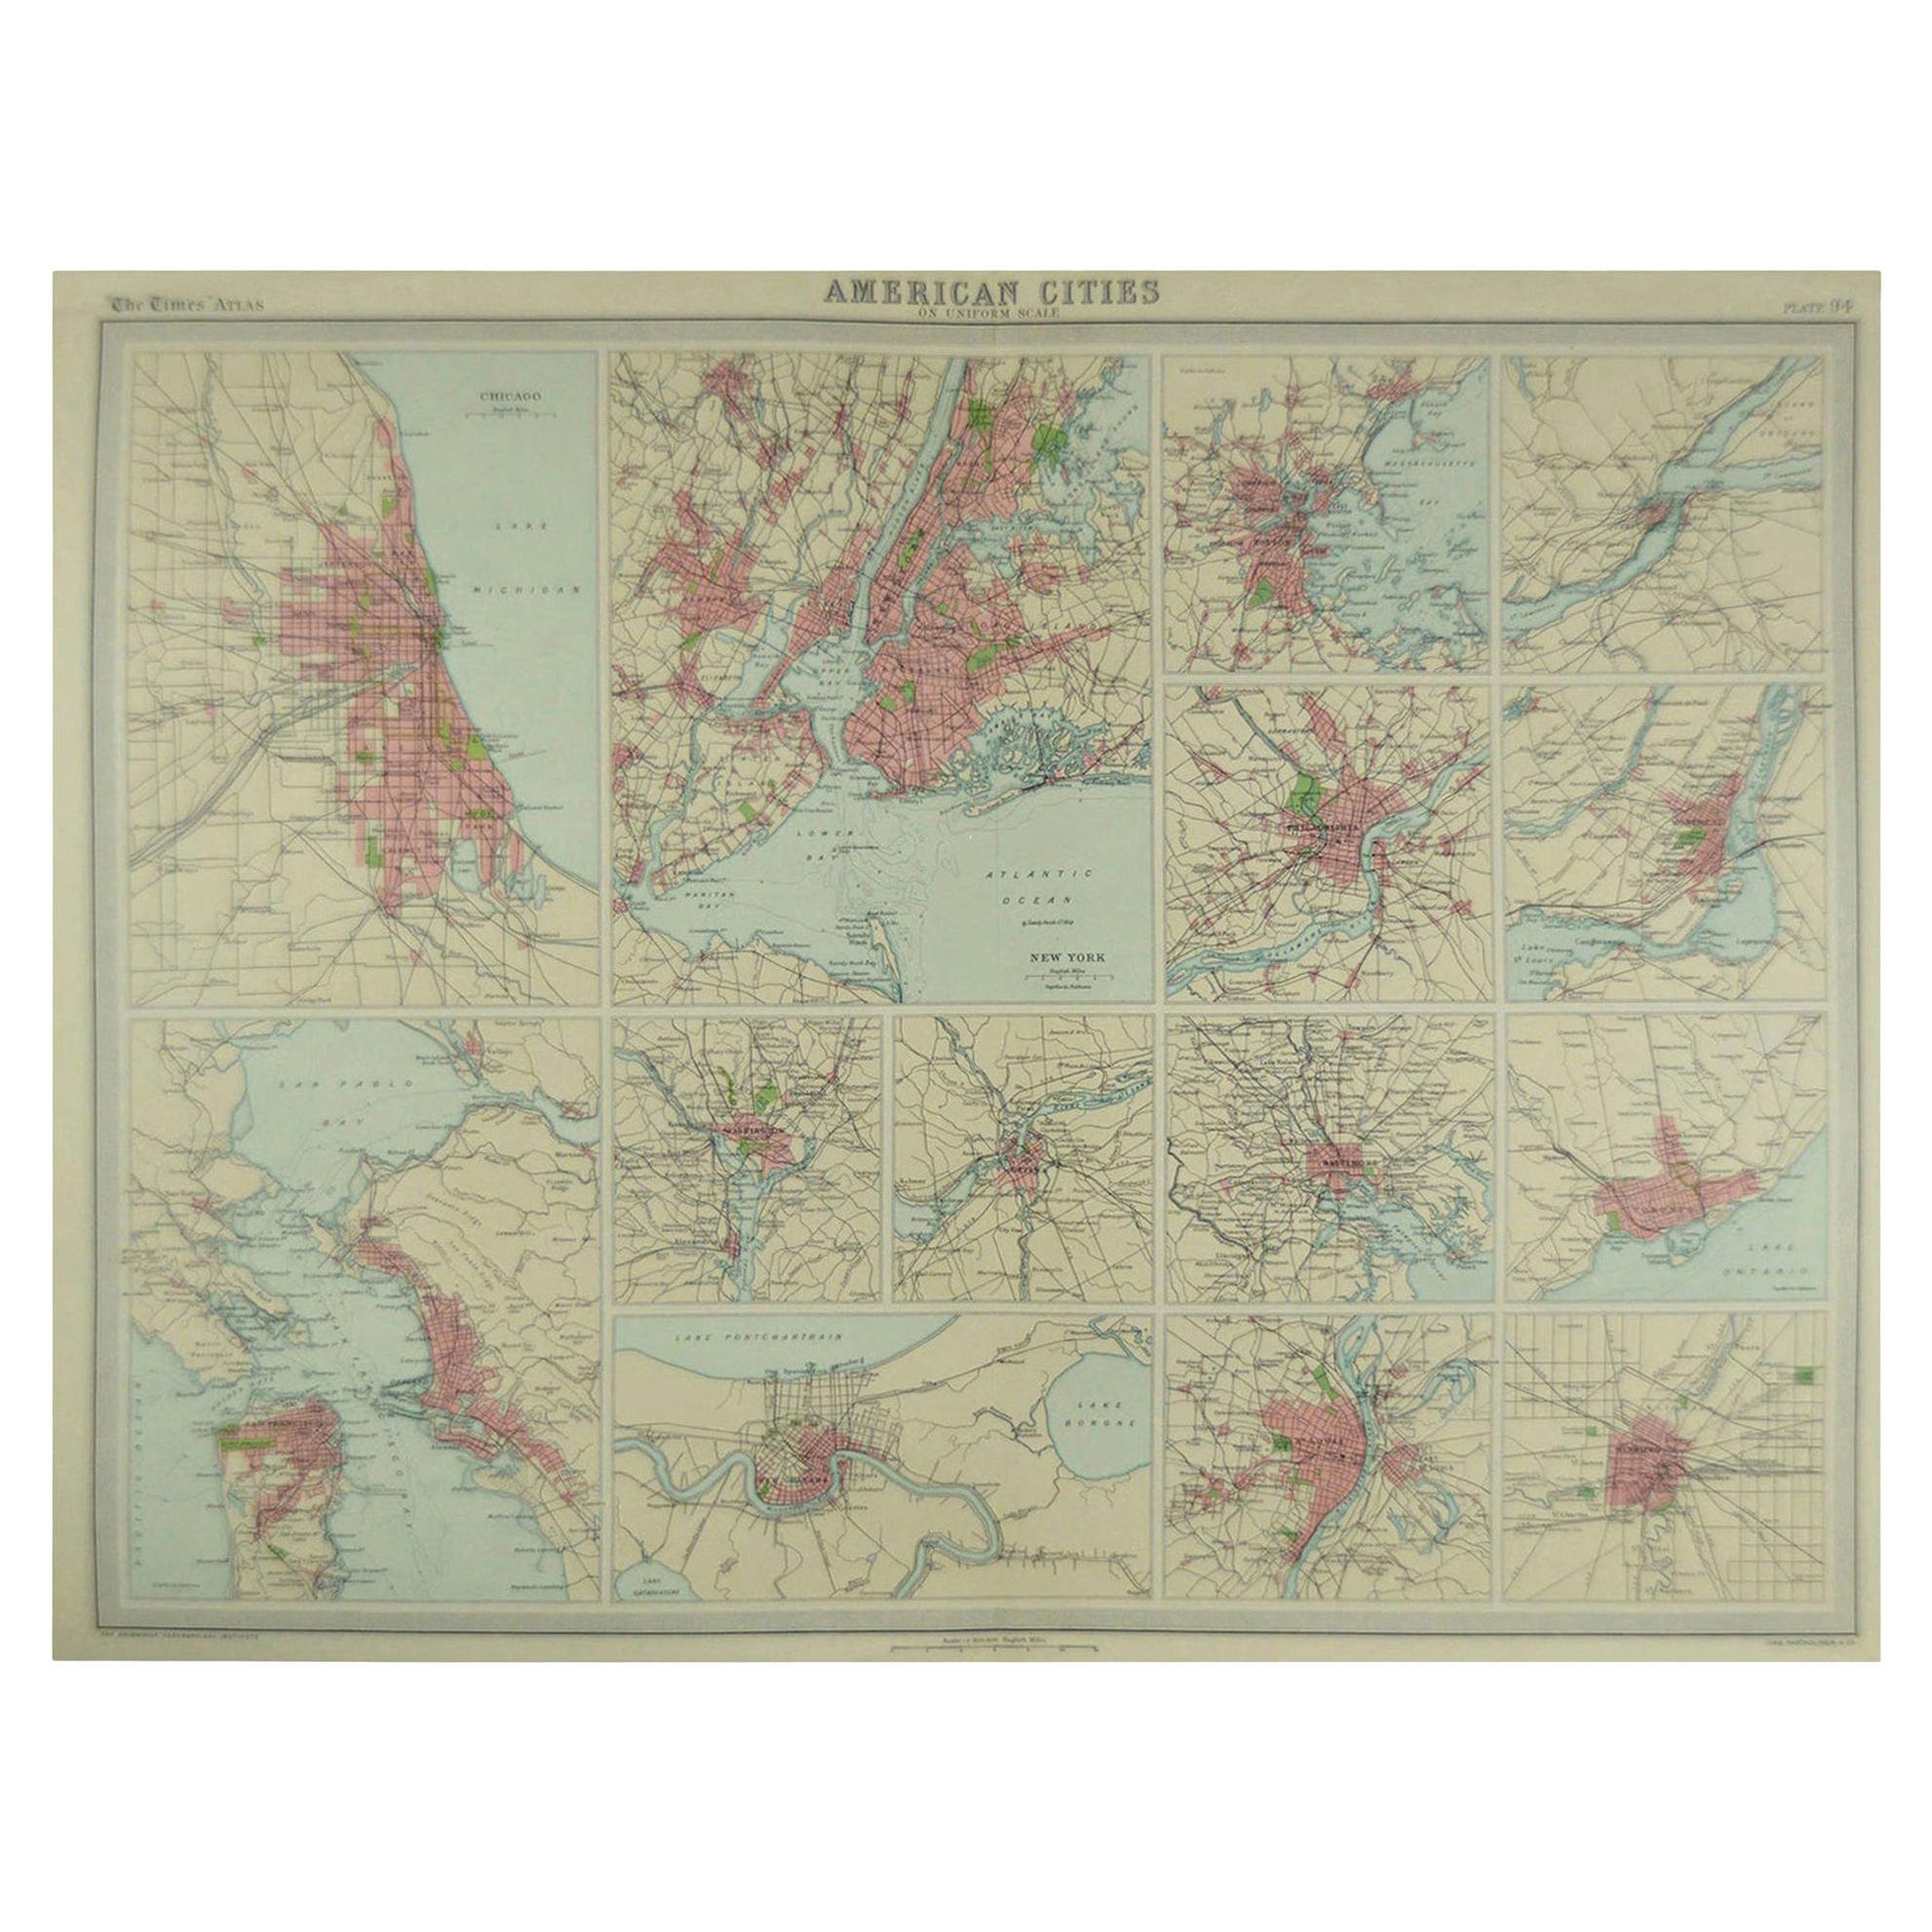 Great maps of American Cities

Unframed

Original color

By John Bartholomew and Co. Edinburgh Geographical Institute

Published, circa 1920

Free shipping.
  